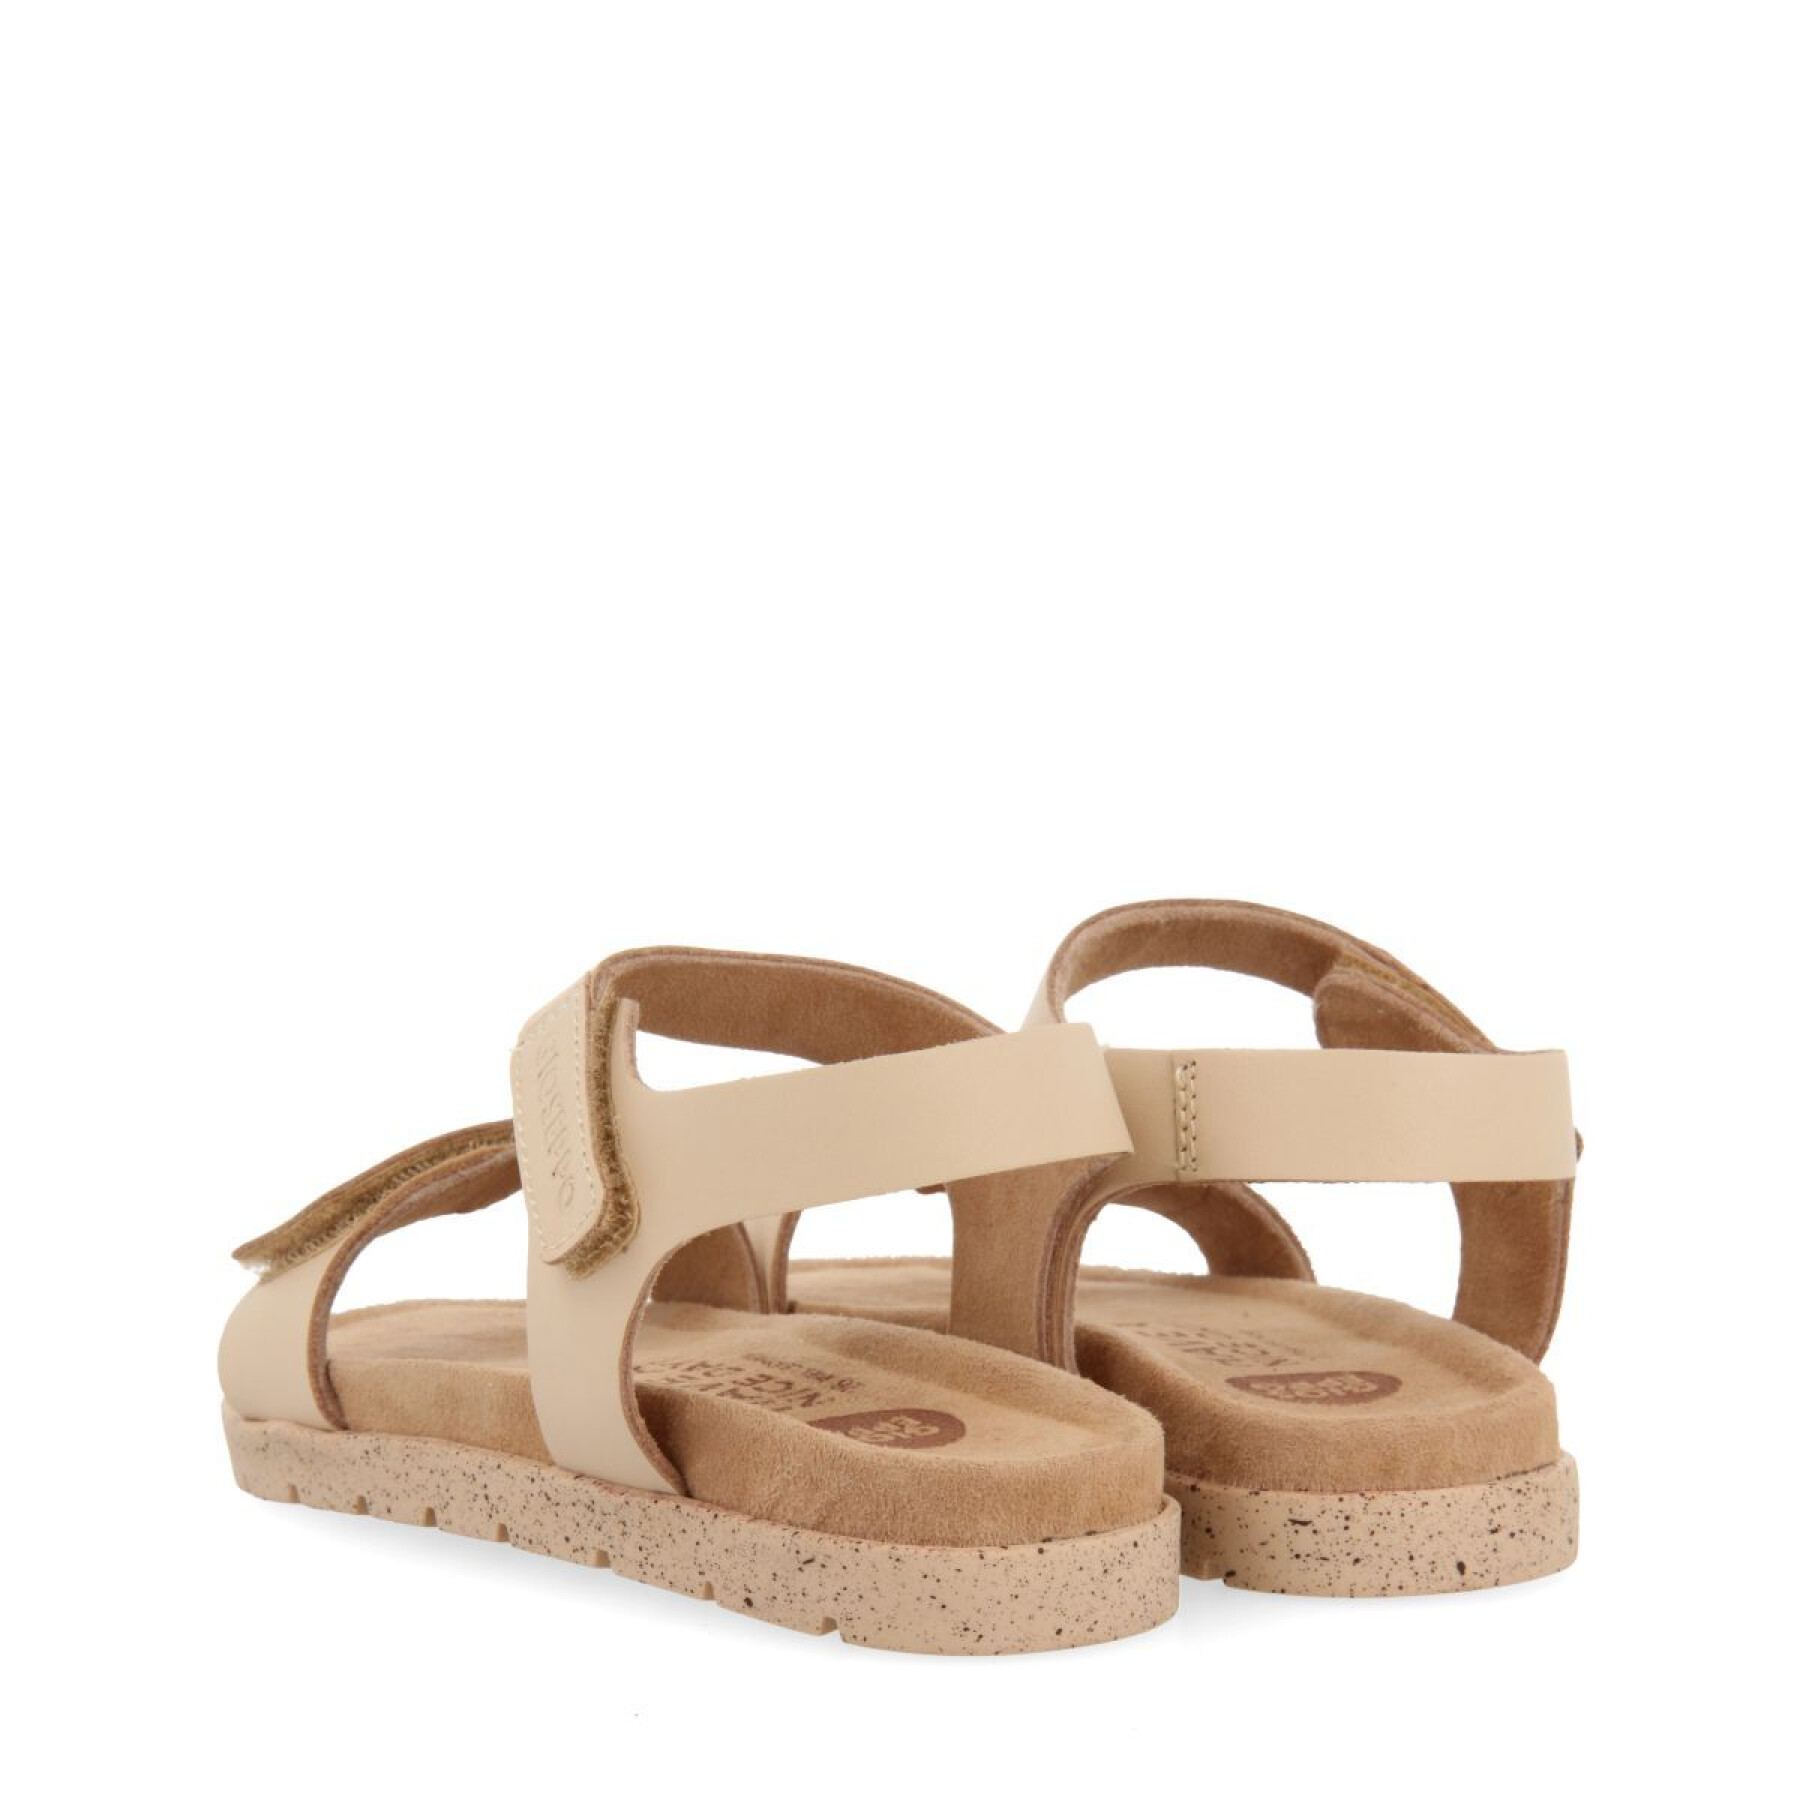 Baby girl sandals Gioseppo Bude